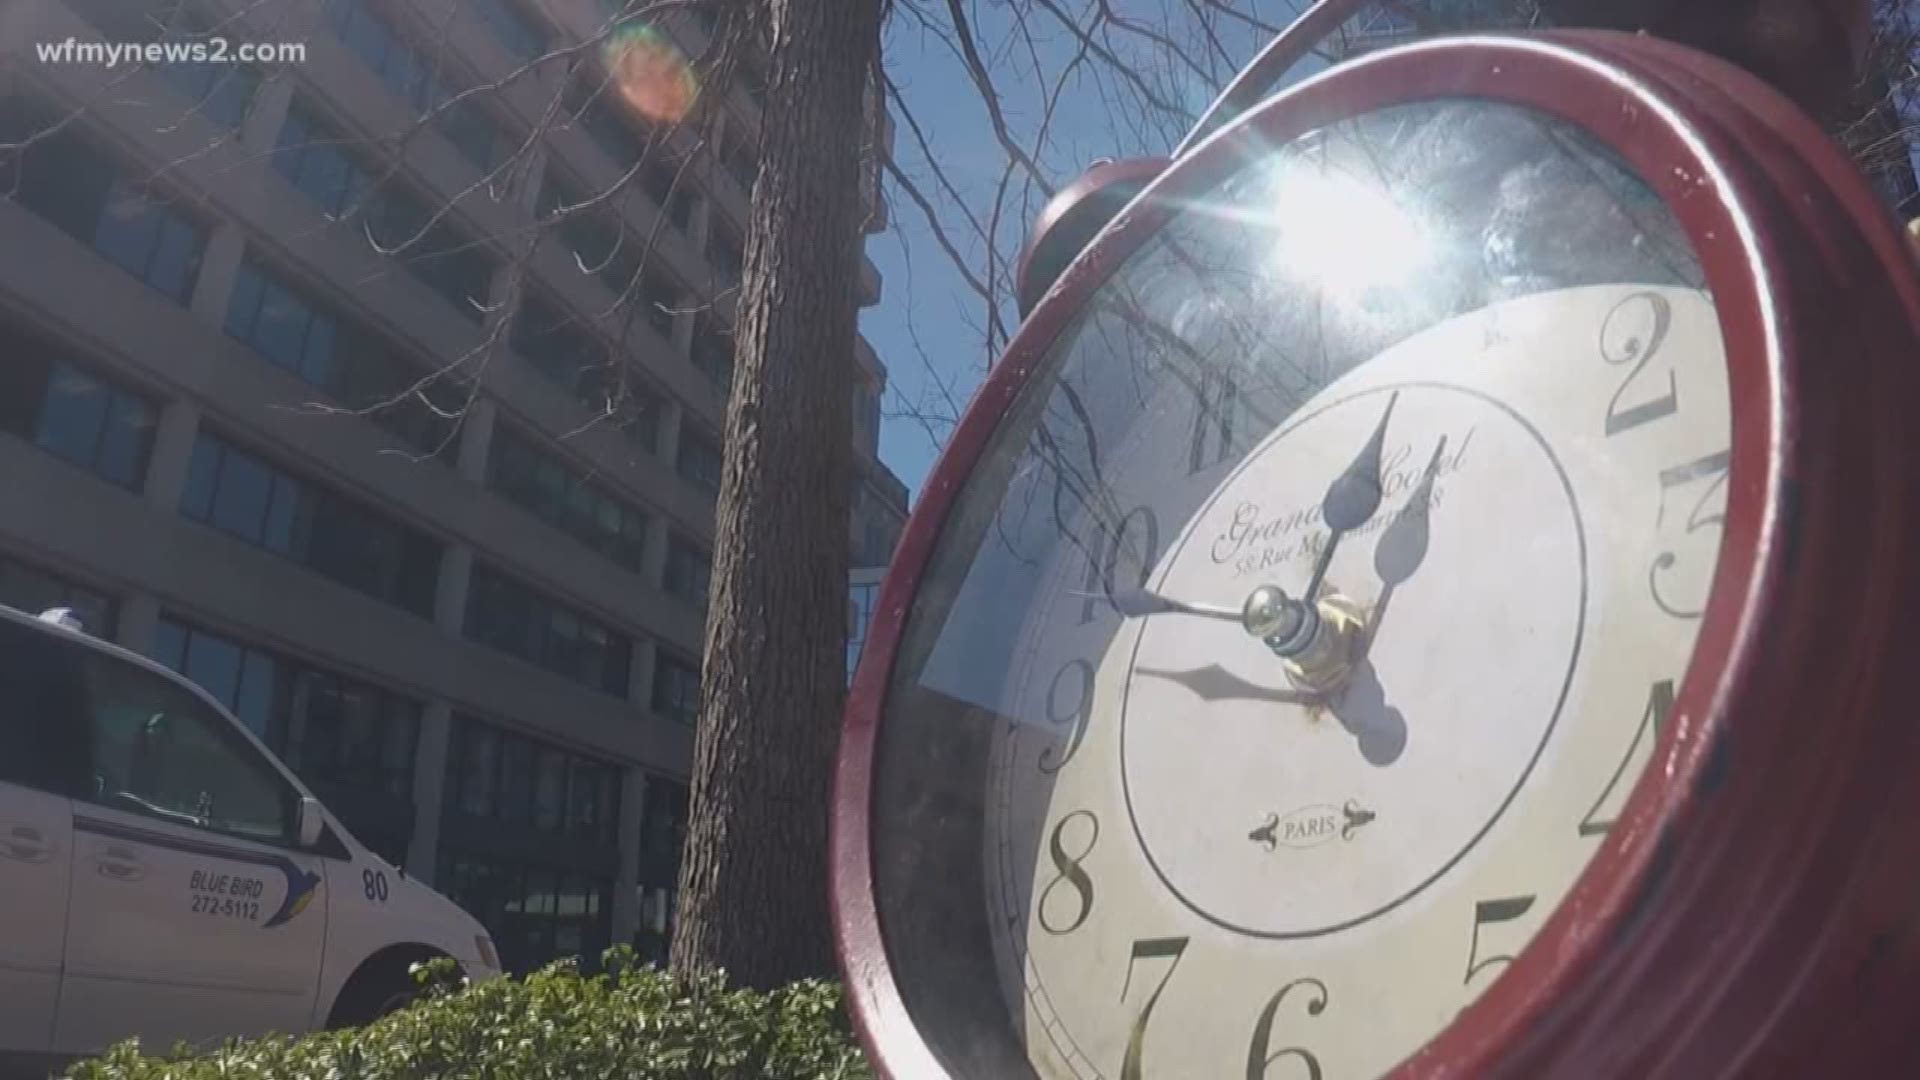 Are you saying it right? There is no "s" at the end of Daylight Saving Time.